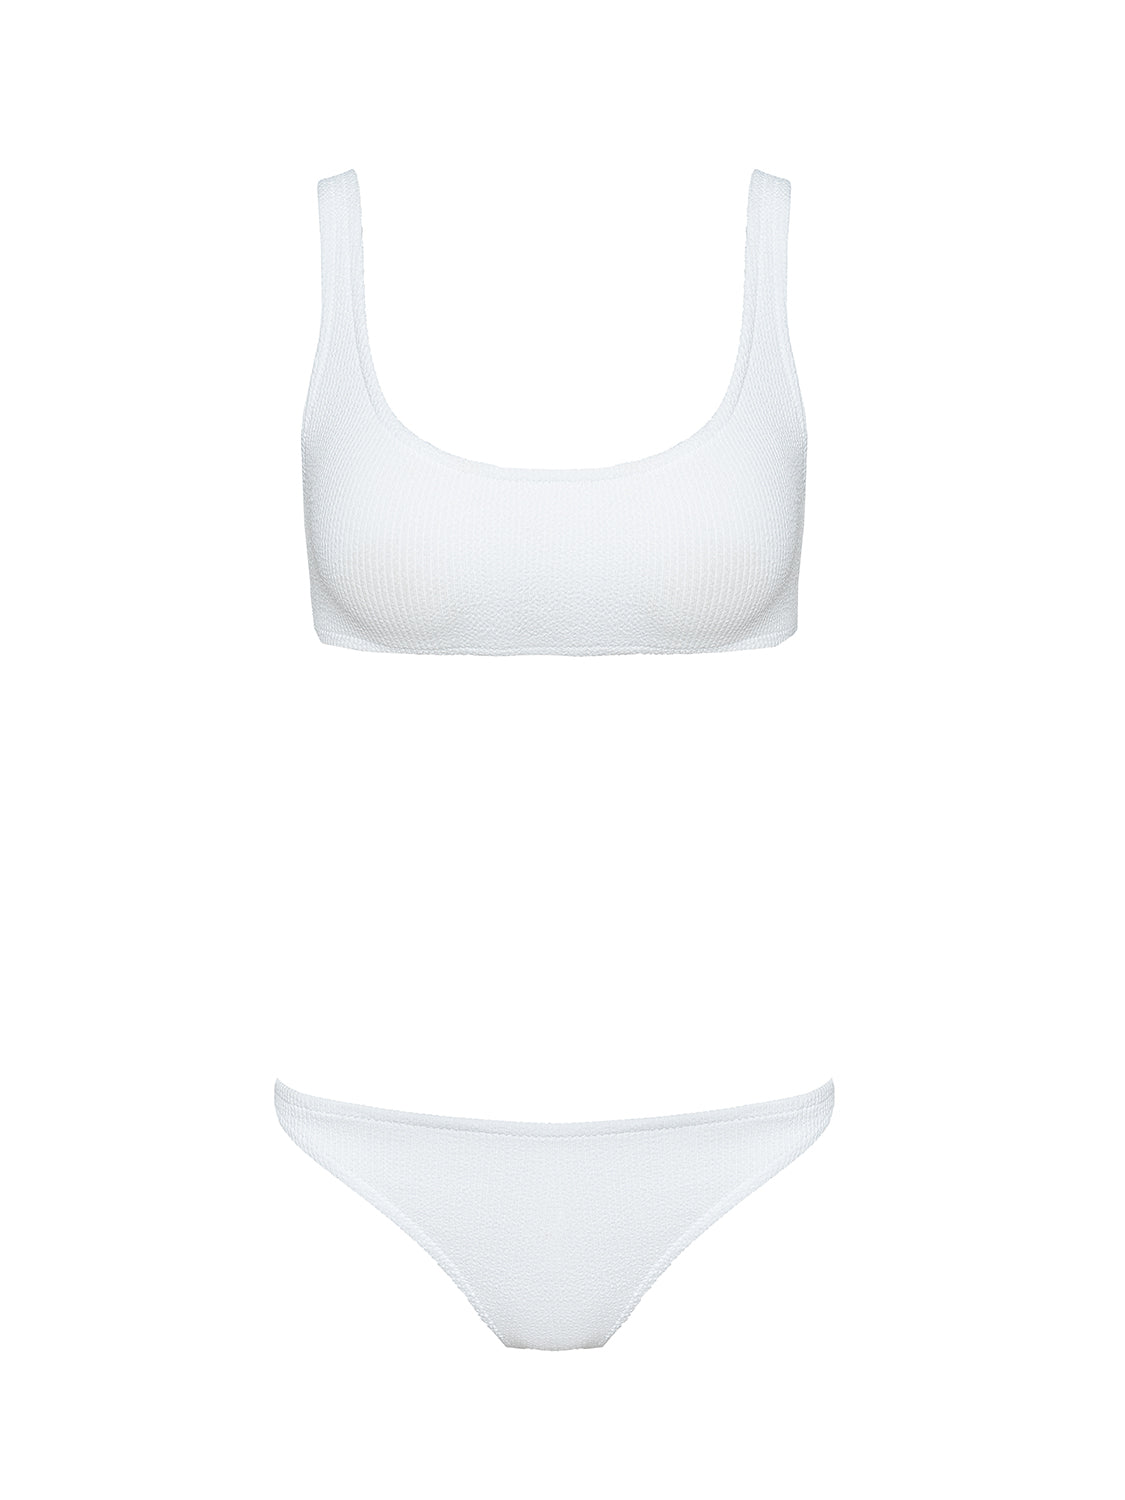 White swimsuit one size